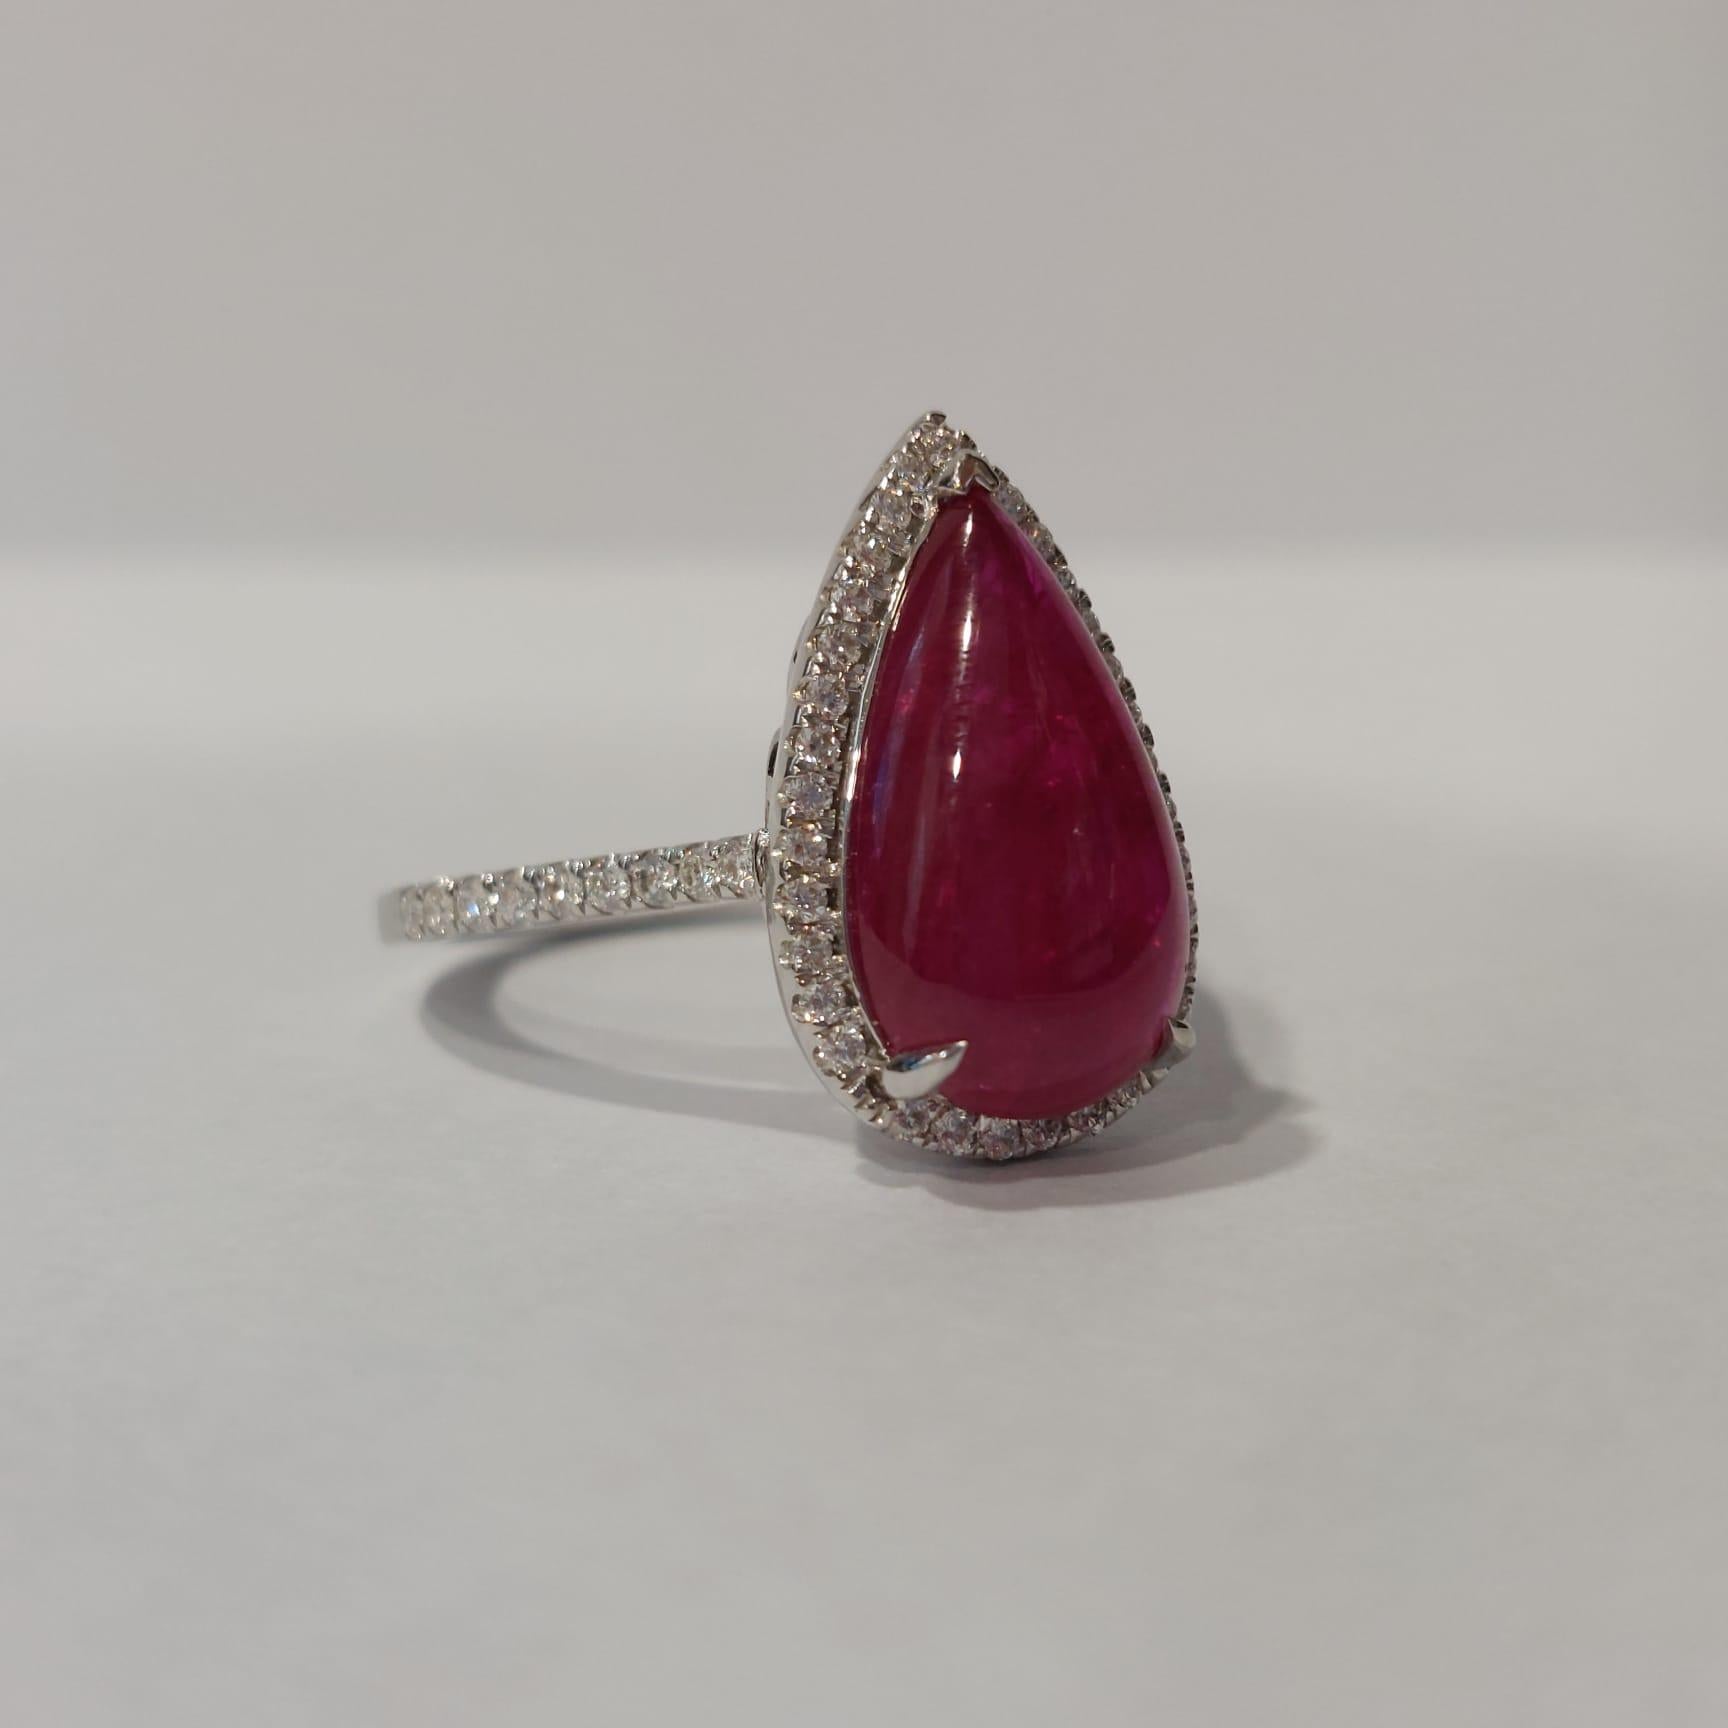 Add a romantic touch to your proposal with a ruby engagement ring featuring this signature red-hued gemstone. Considered the stone of love, rubies bring lasting beauty to any ring. The deep tone of this gemstone makes it a captivating choice for